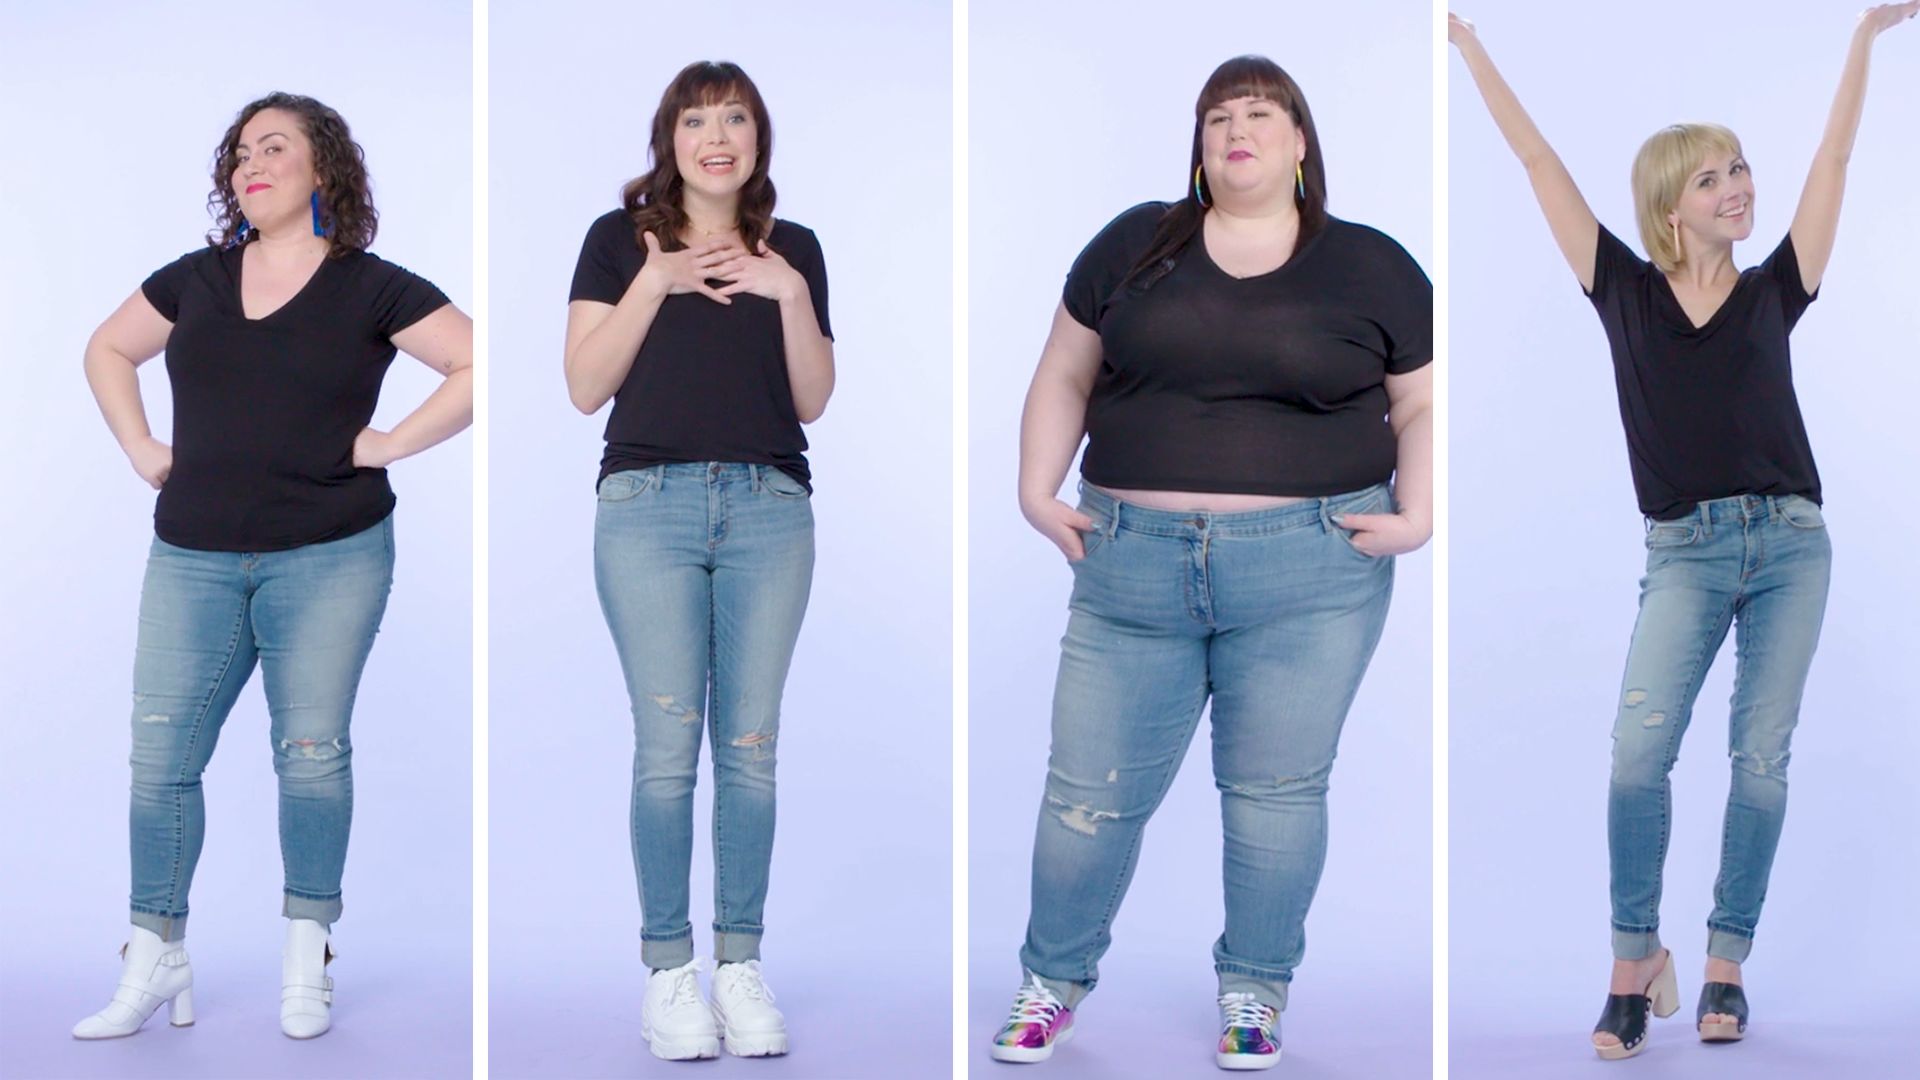 Watch Women Sizes 0 Through 28 Try on the Same Skinny Jeans